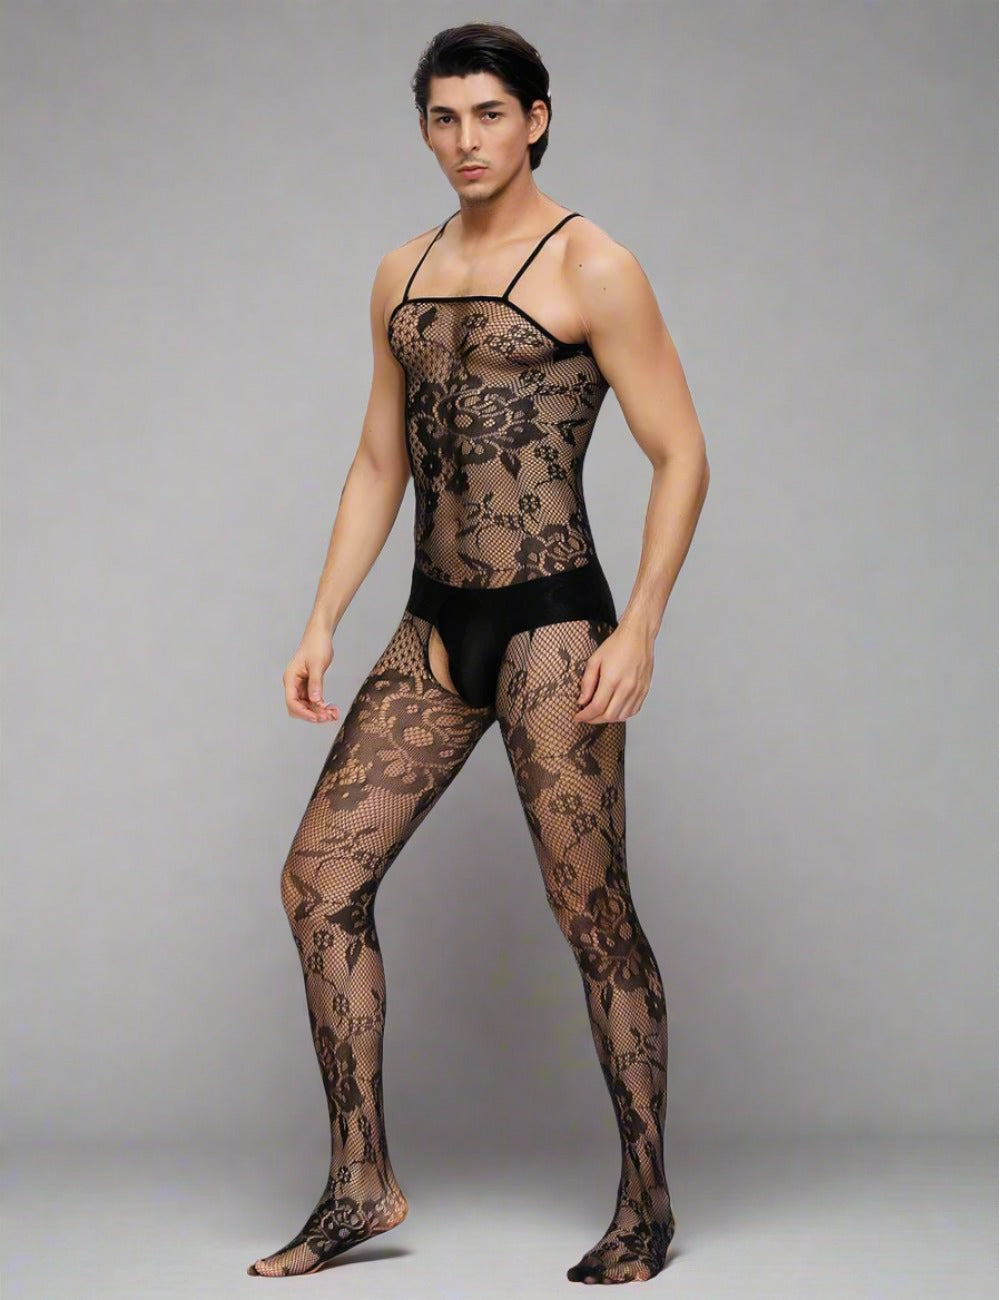 Scandals Floral Spaghetti Strap Body stocking Menswear Scandals Lingerie. Back view.